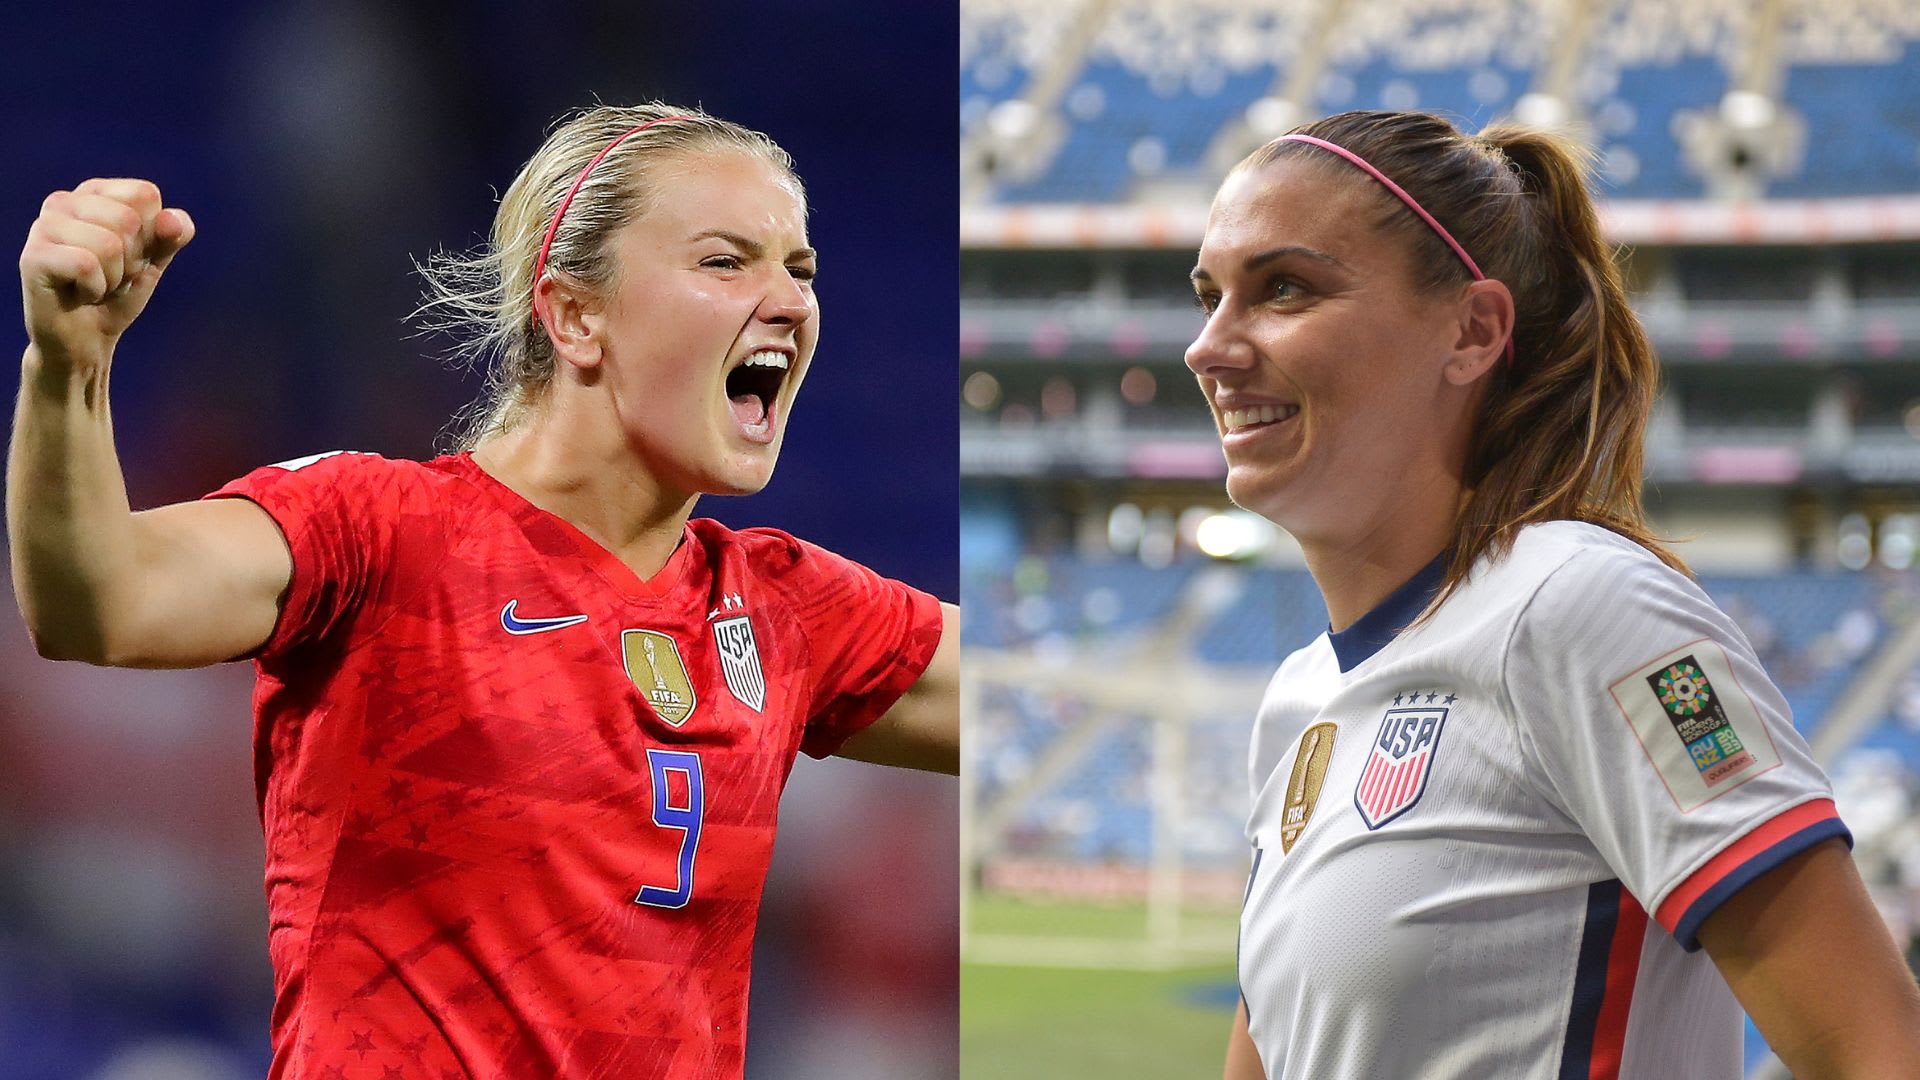 As the Women's World Cup gets underway, a look at the history of